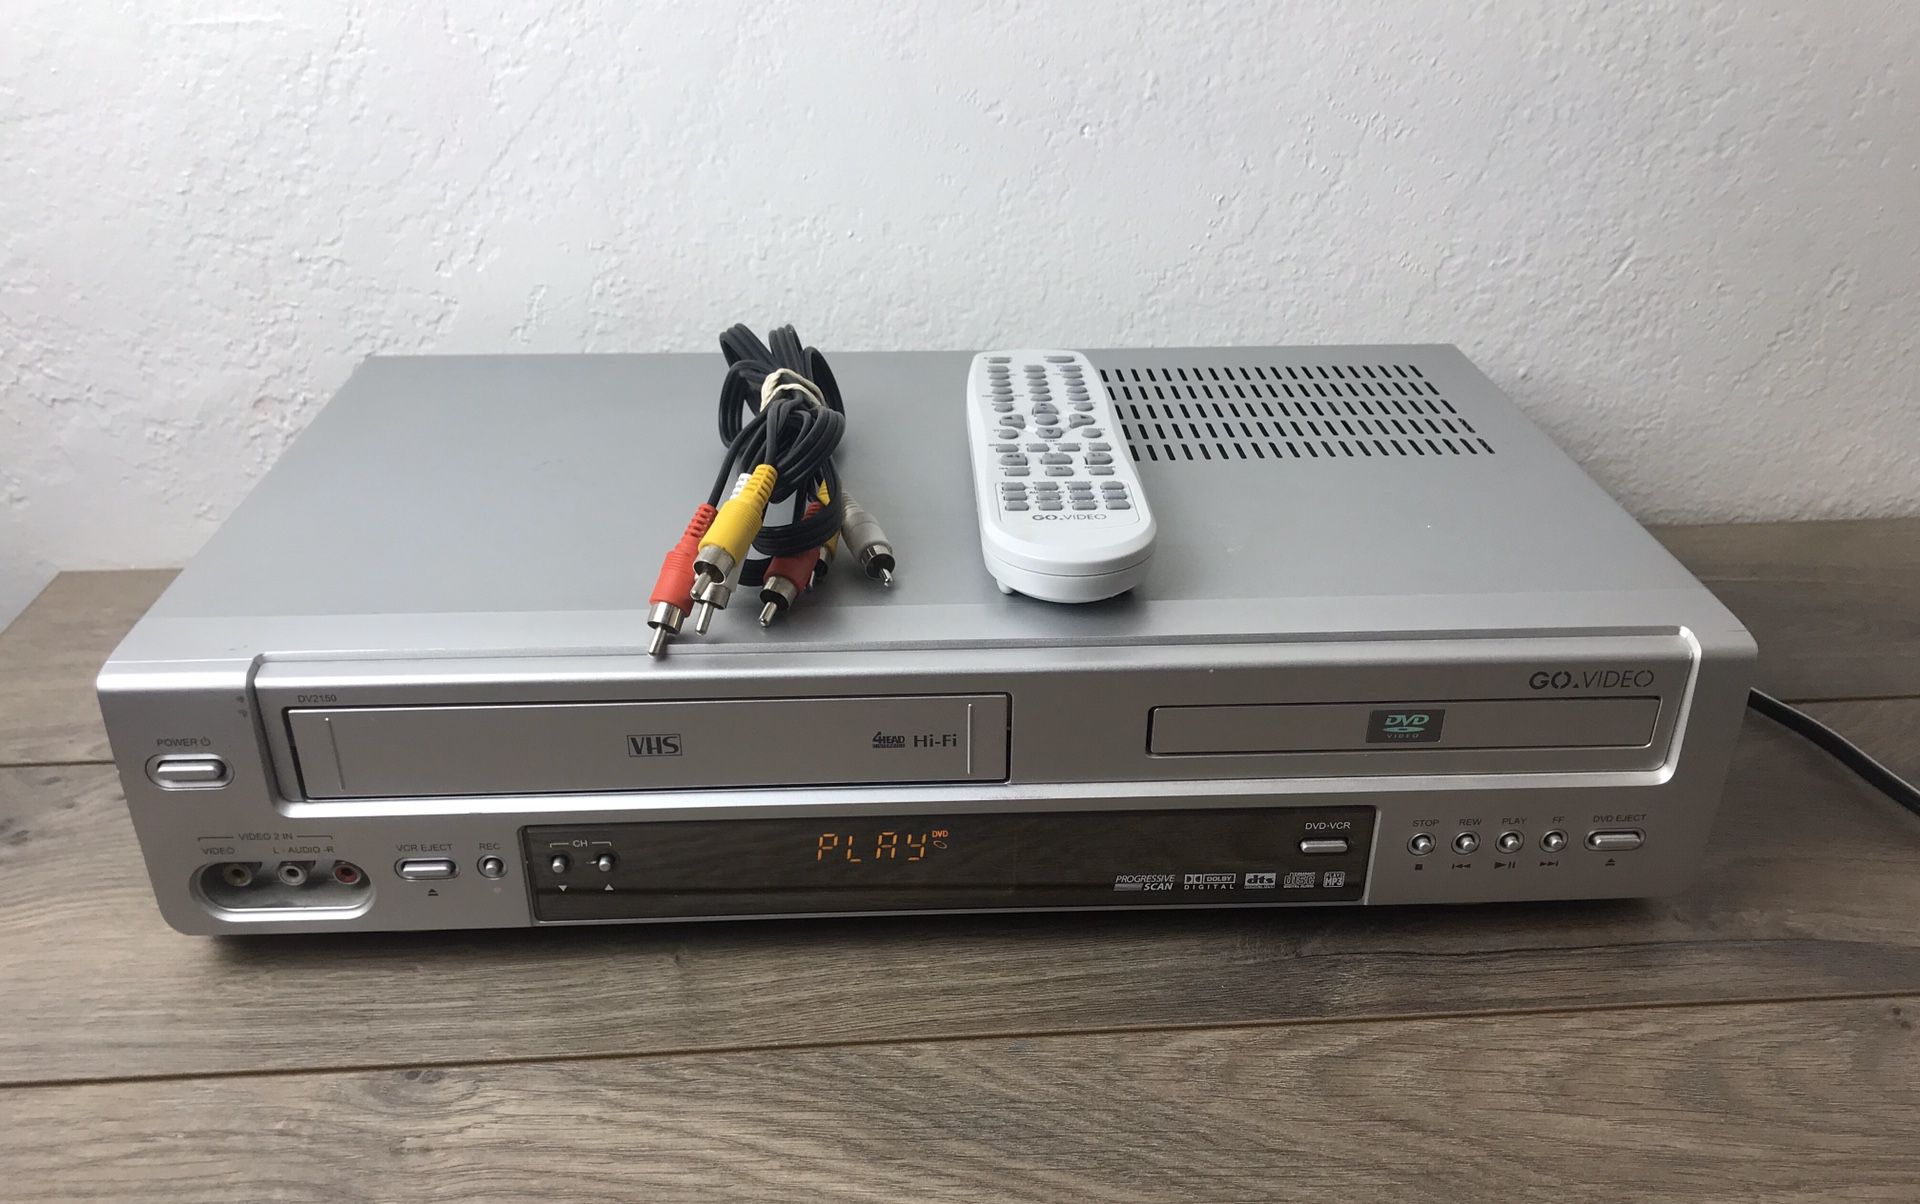 Go Video DV2150 DVD VCR Combo Hi-Fi VHS Player - great condition